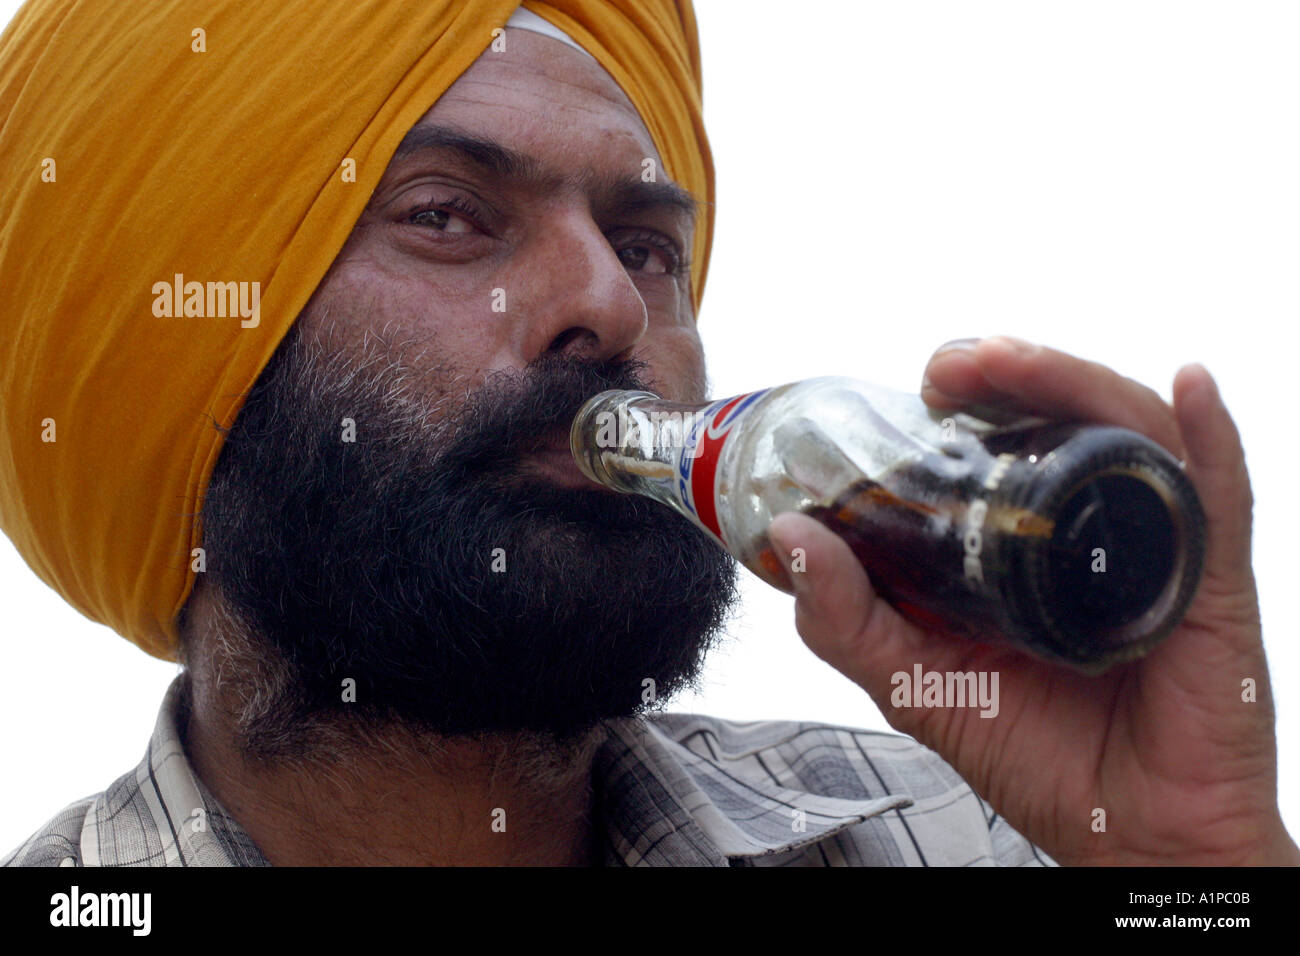 A Sikh man wearing a turban drinks from a persi cola bottle in New Delhi in India Stock Photo